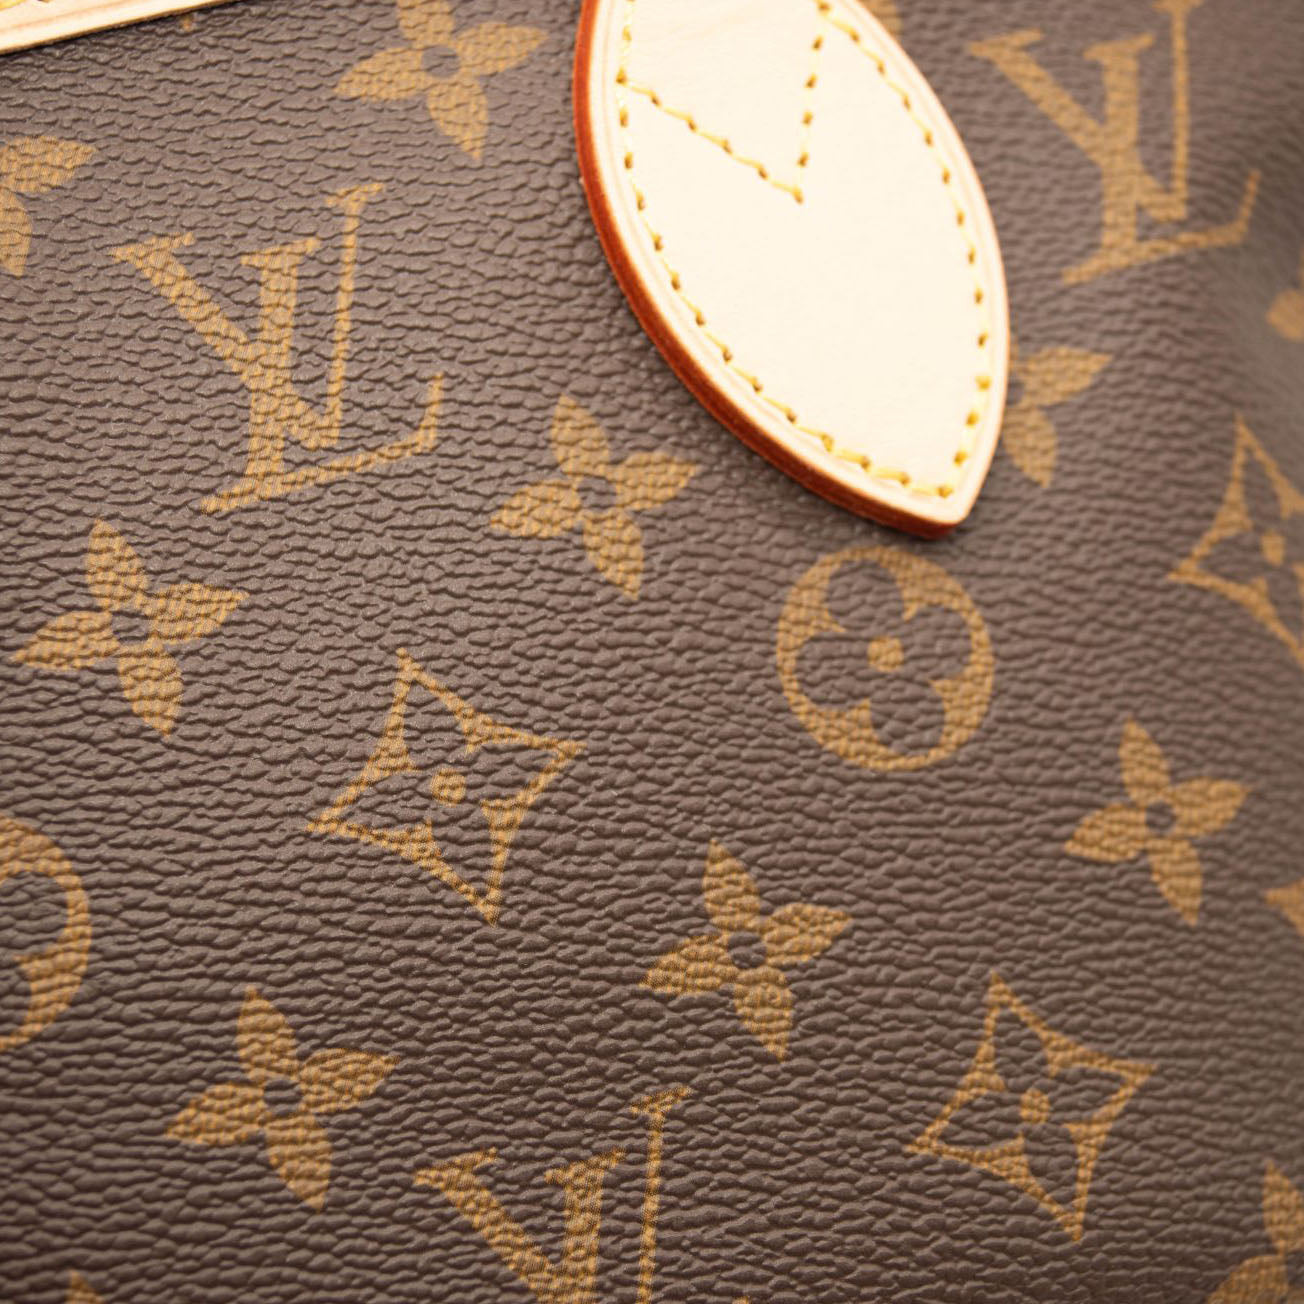 The NEW Louis Vuitton Neverfull BB - small bag at a big price